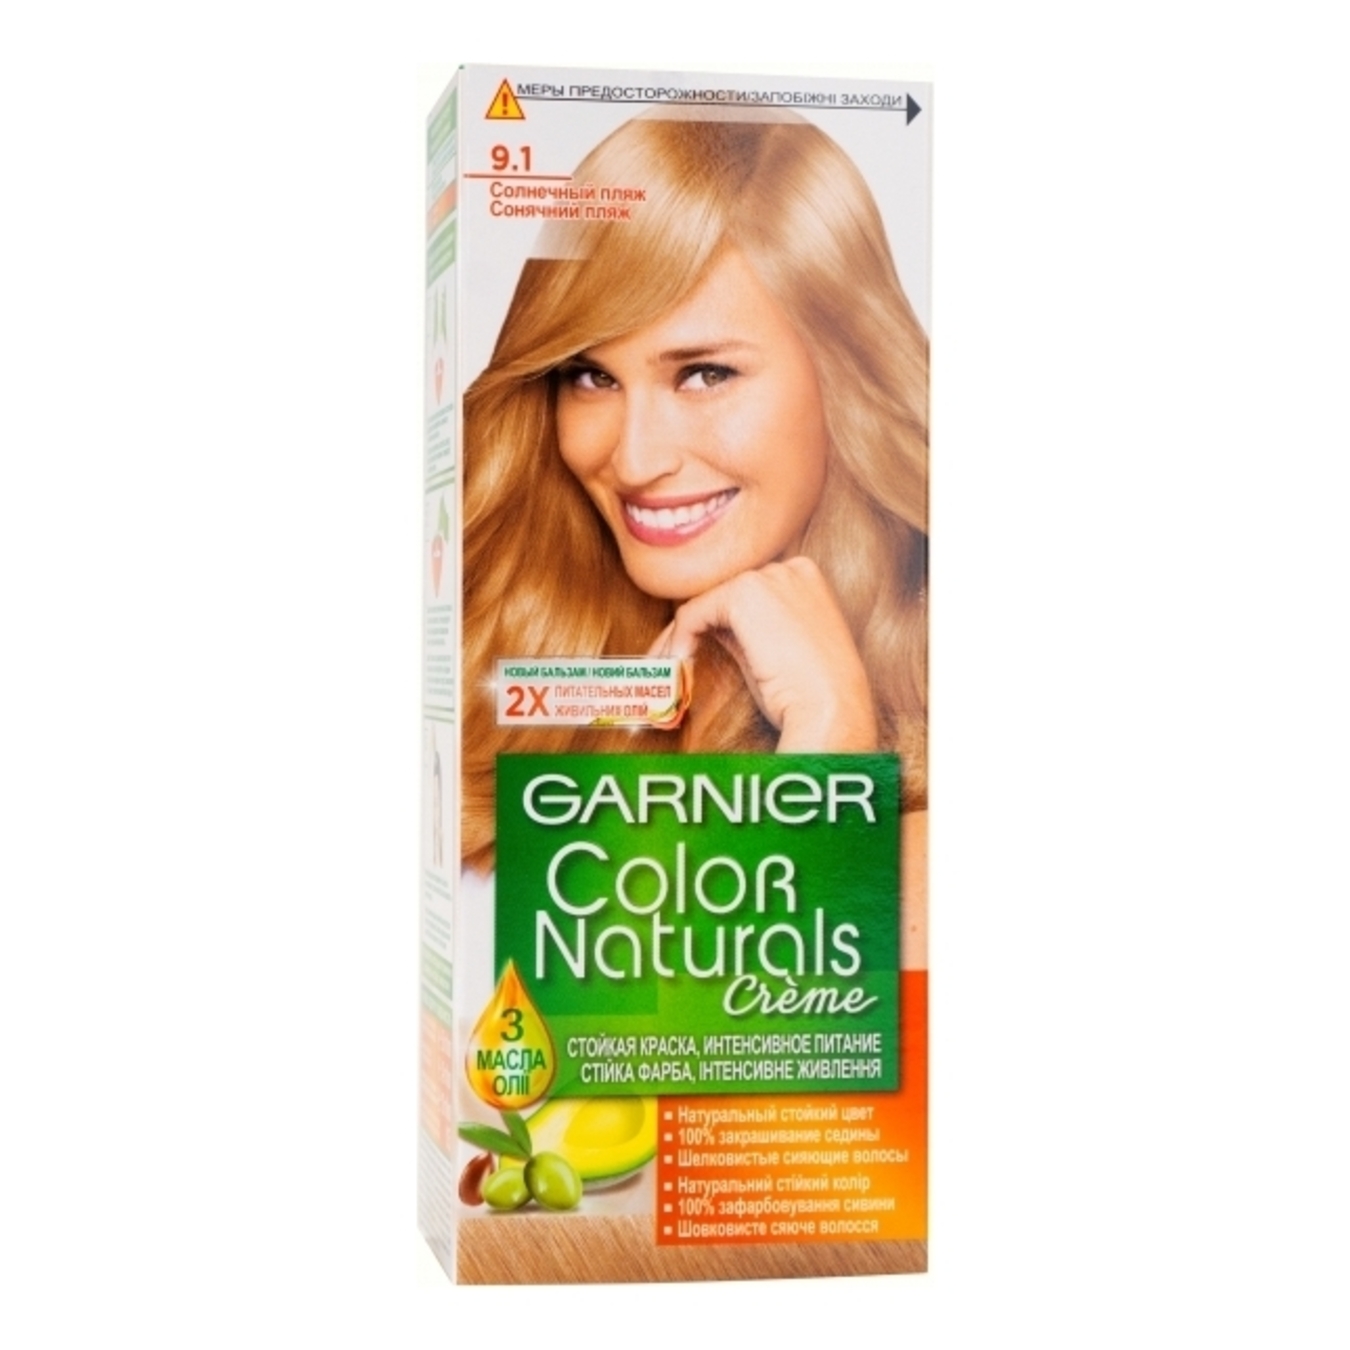 Garnier Color Naturals Creme With 3 Oils  Sunny Beach Hair Dye ᐈ Buy at  a good price from Novus